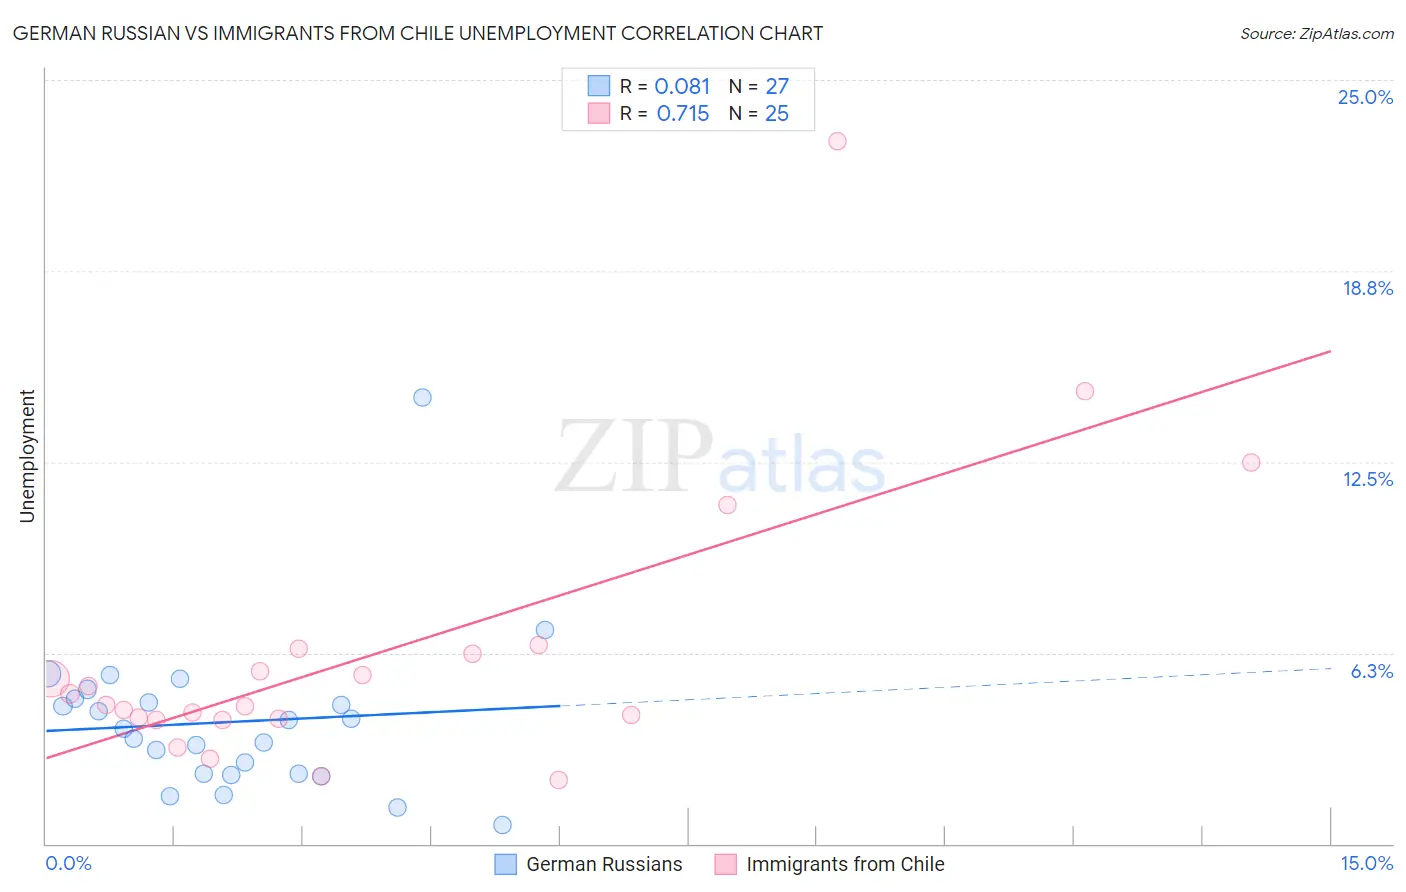 German Russian vs Immigrants from Chile Unemployment